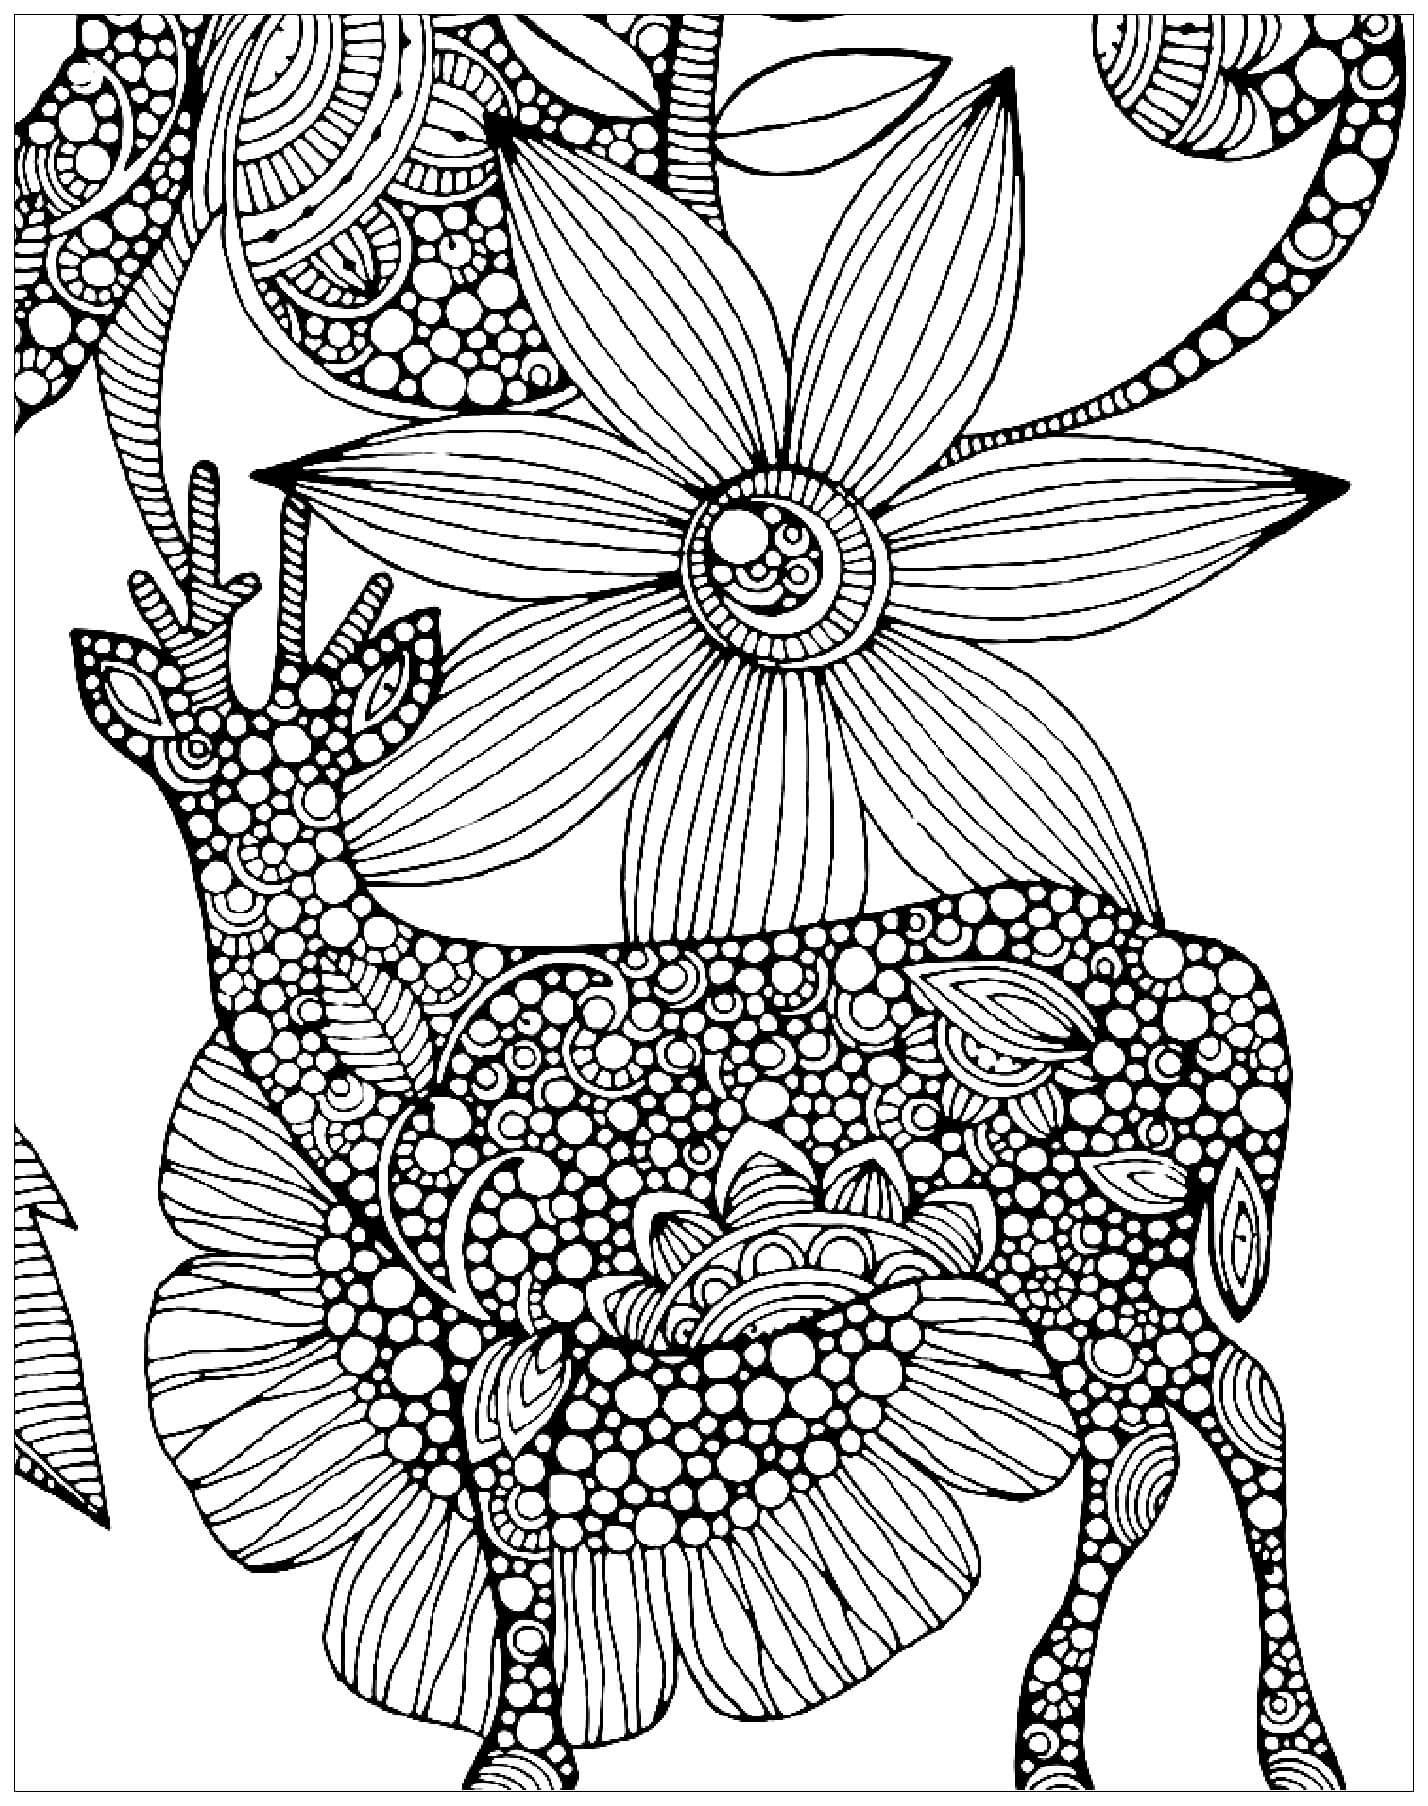 200+ Deer Coloring Pages for Adults: Explore Your Creativity 184